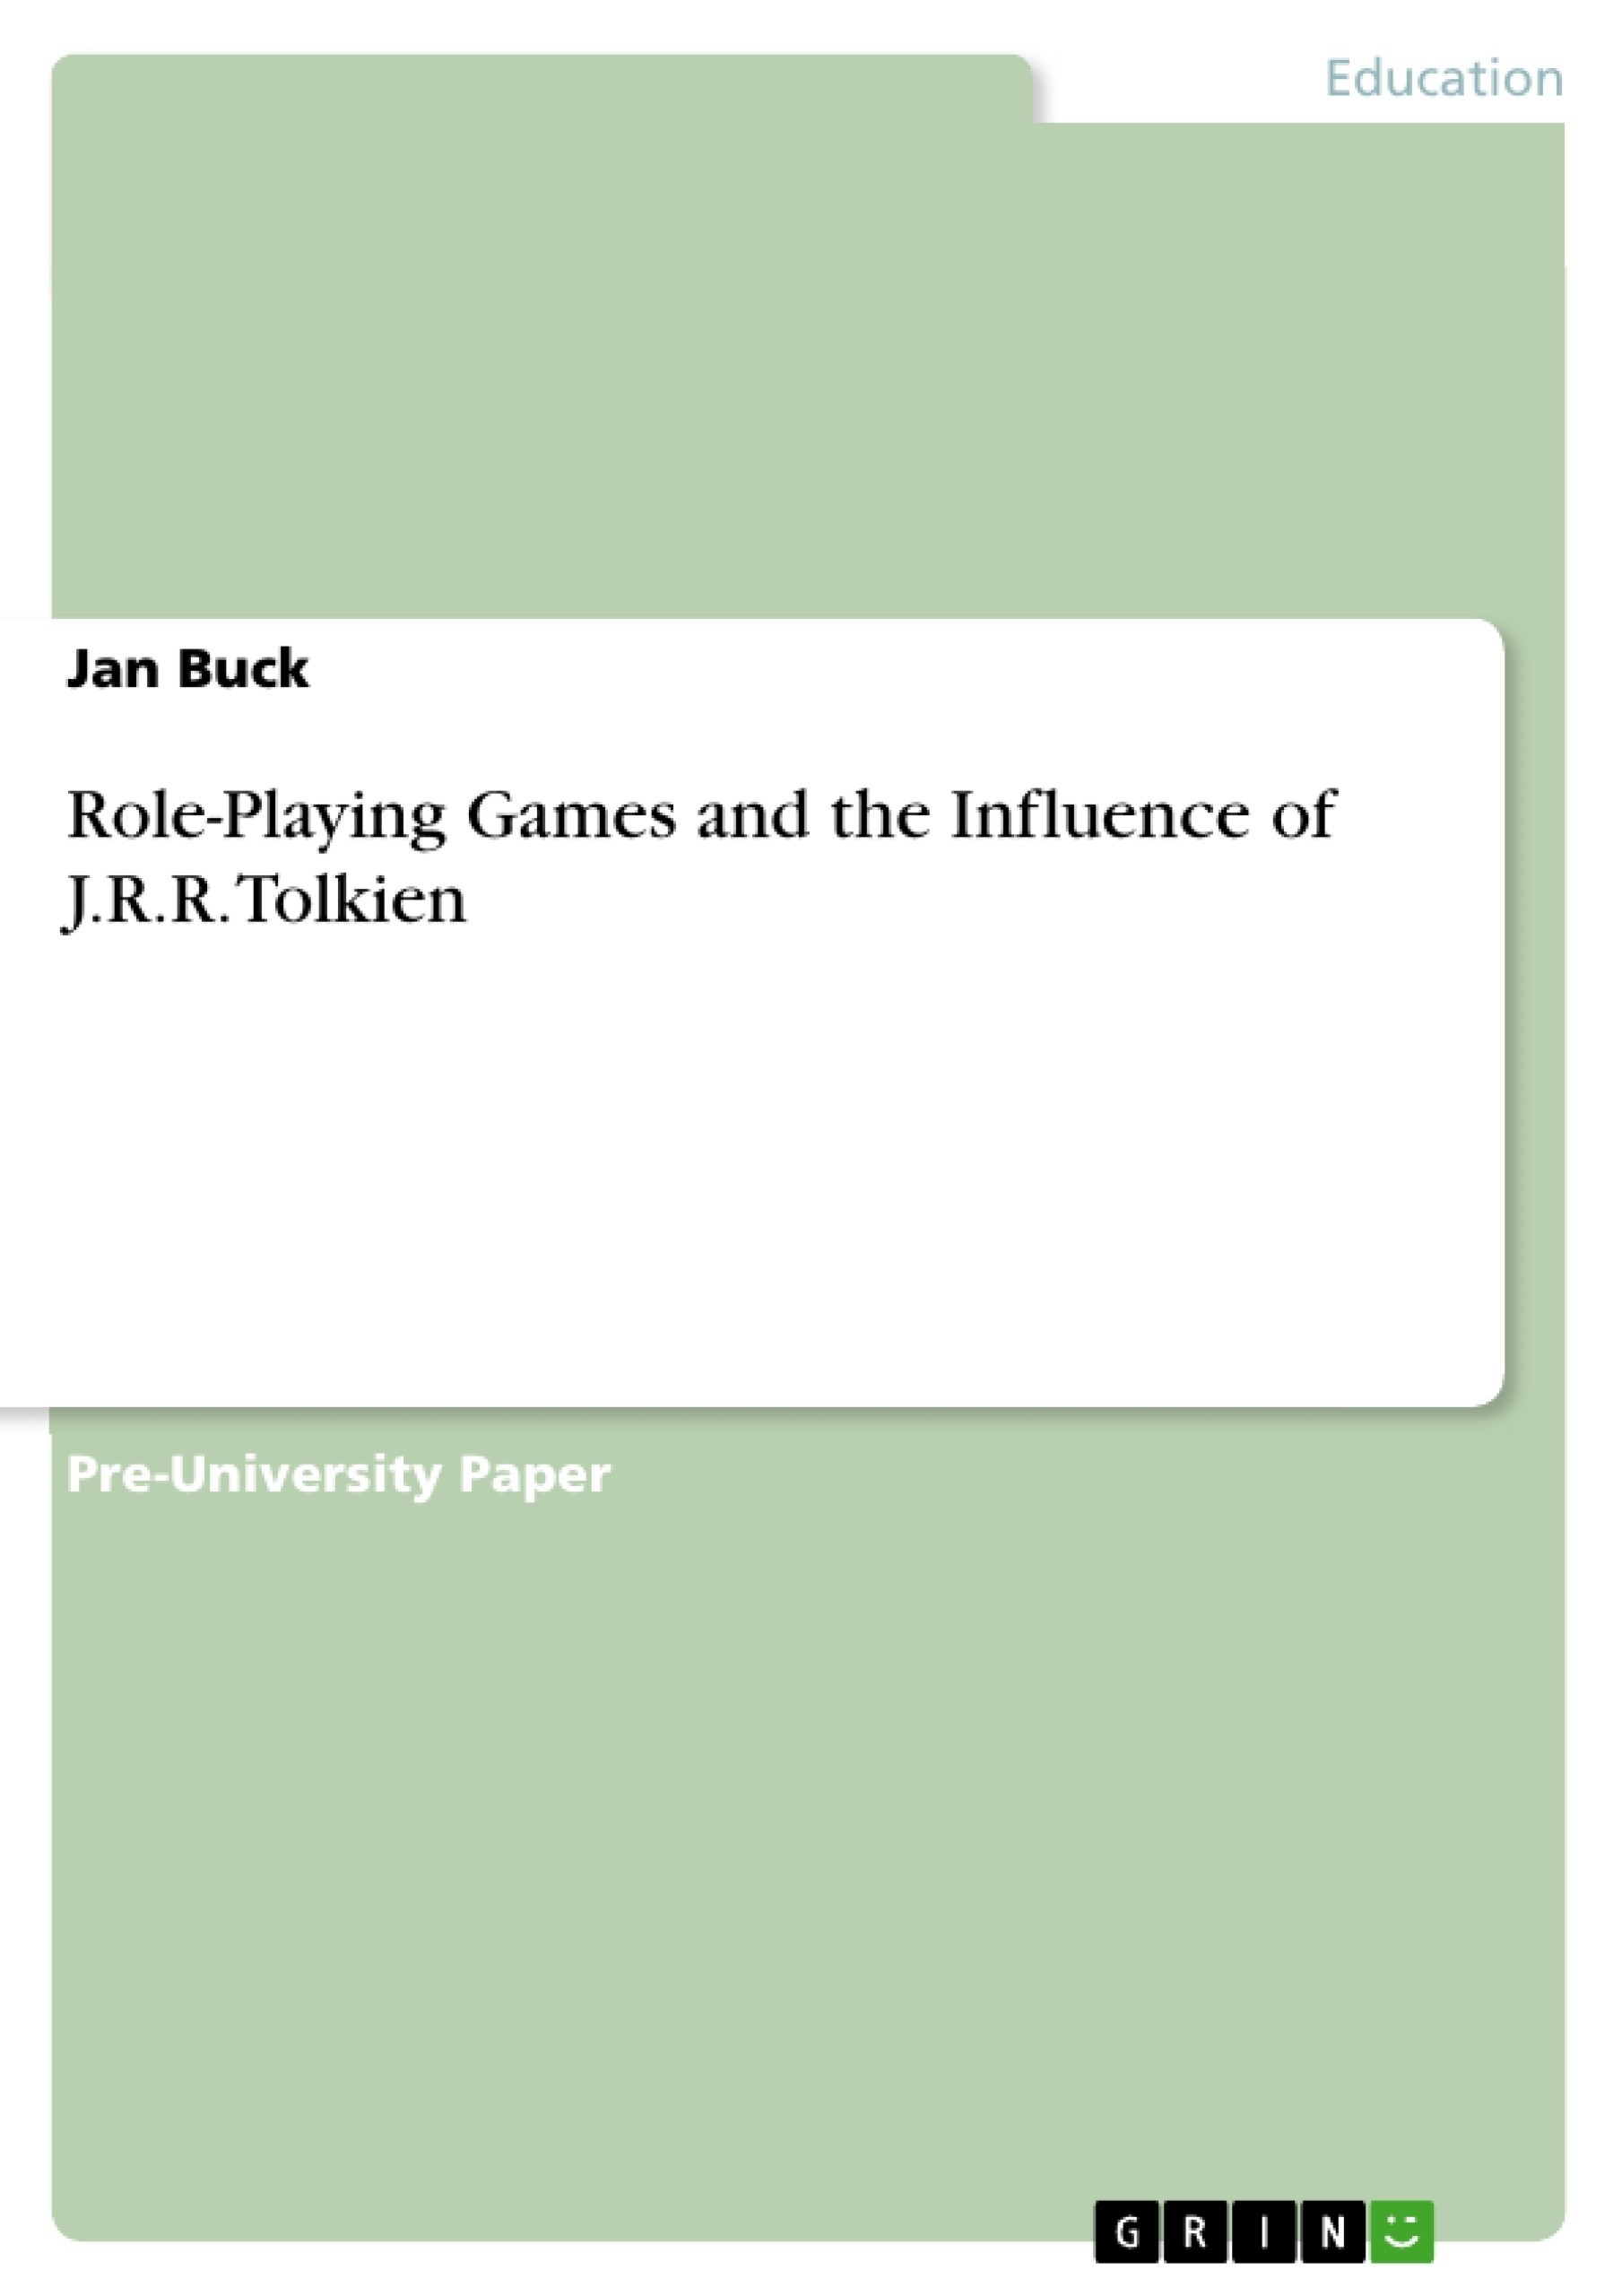 Título: Role-Playing Games and the Influence of J.R.R. Tolkien